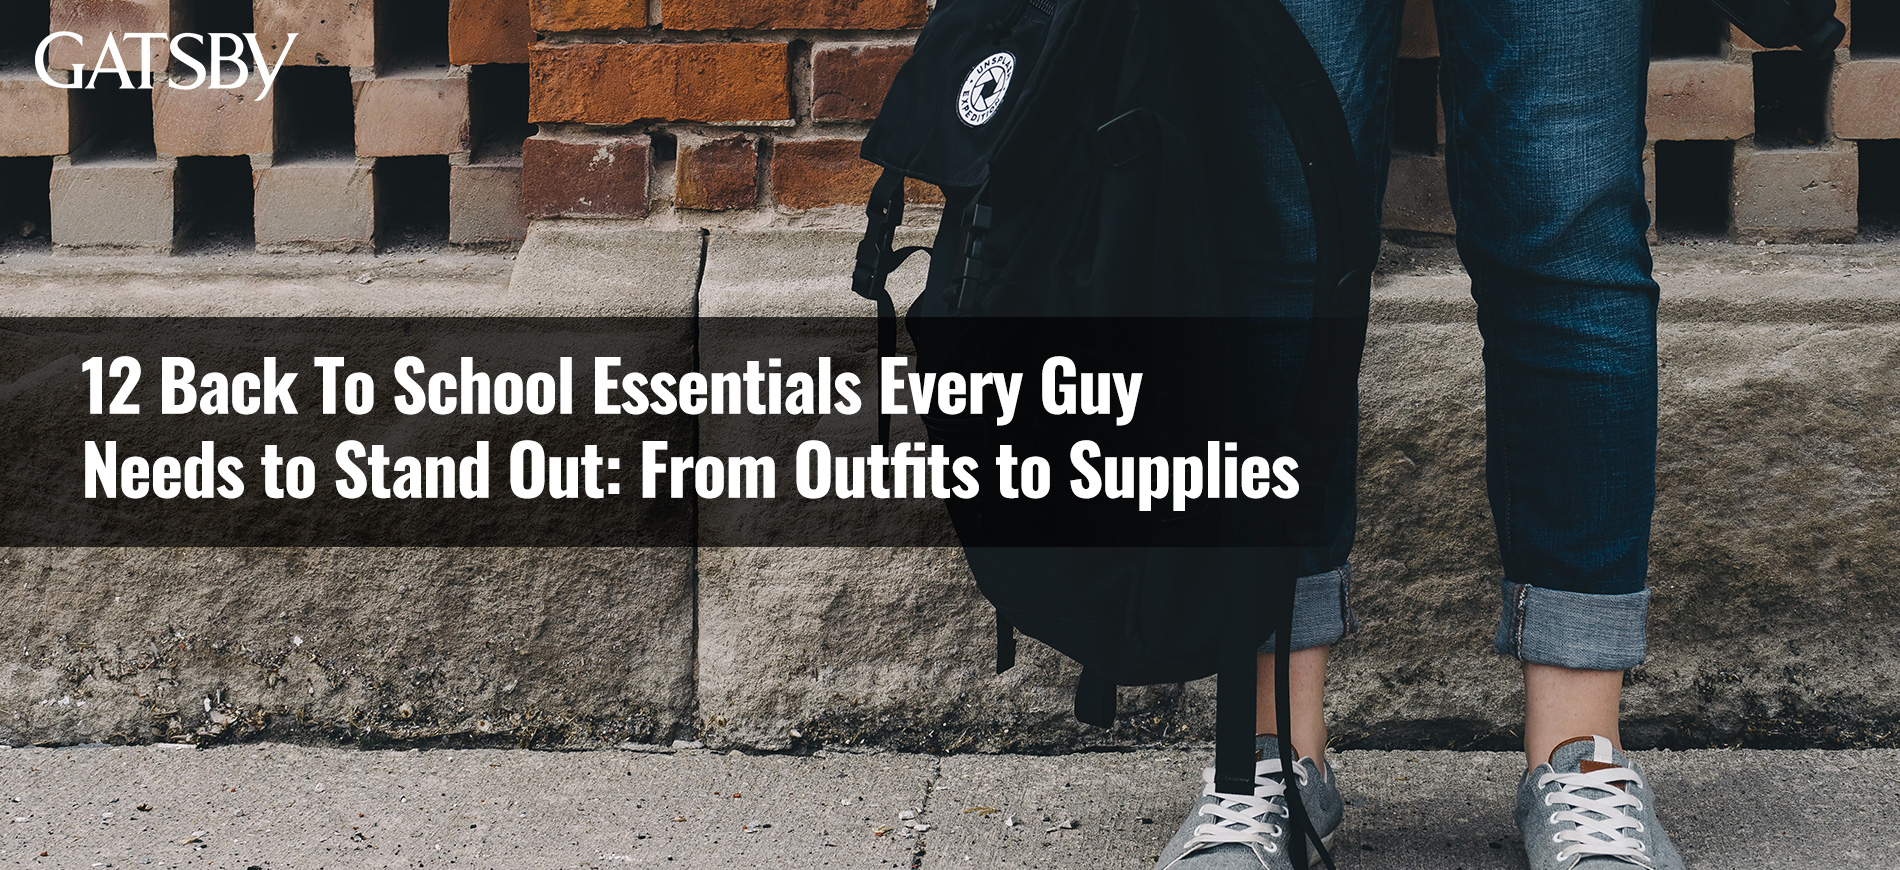 12 Back To School Essentials Every Guy Needs to Stand Out: From Outfits to Supplies